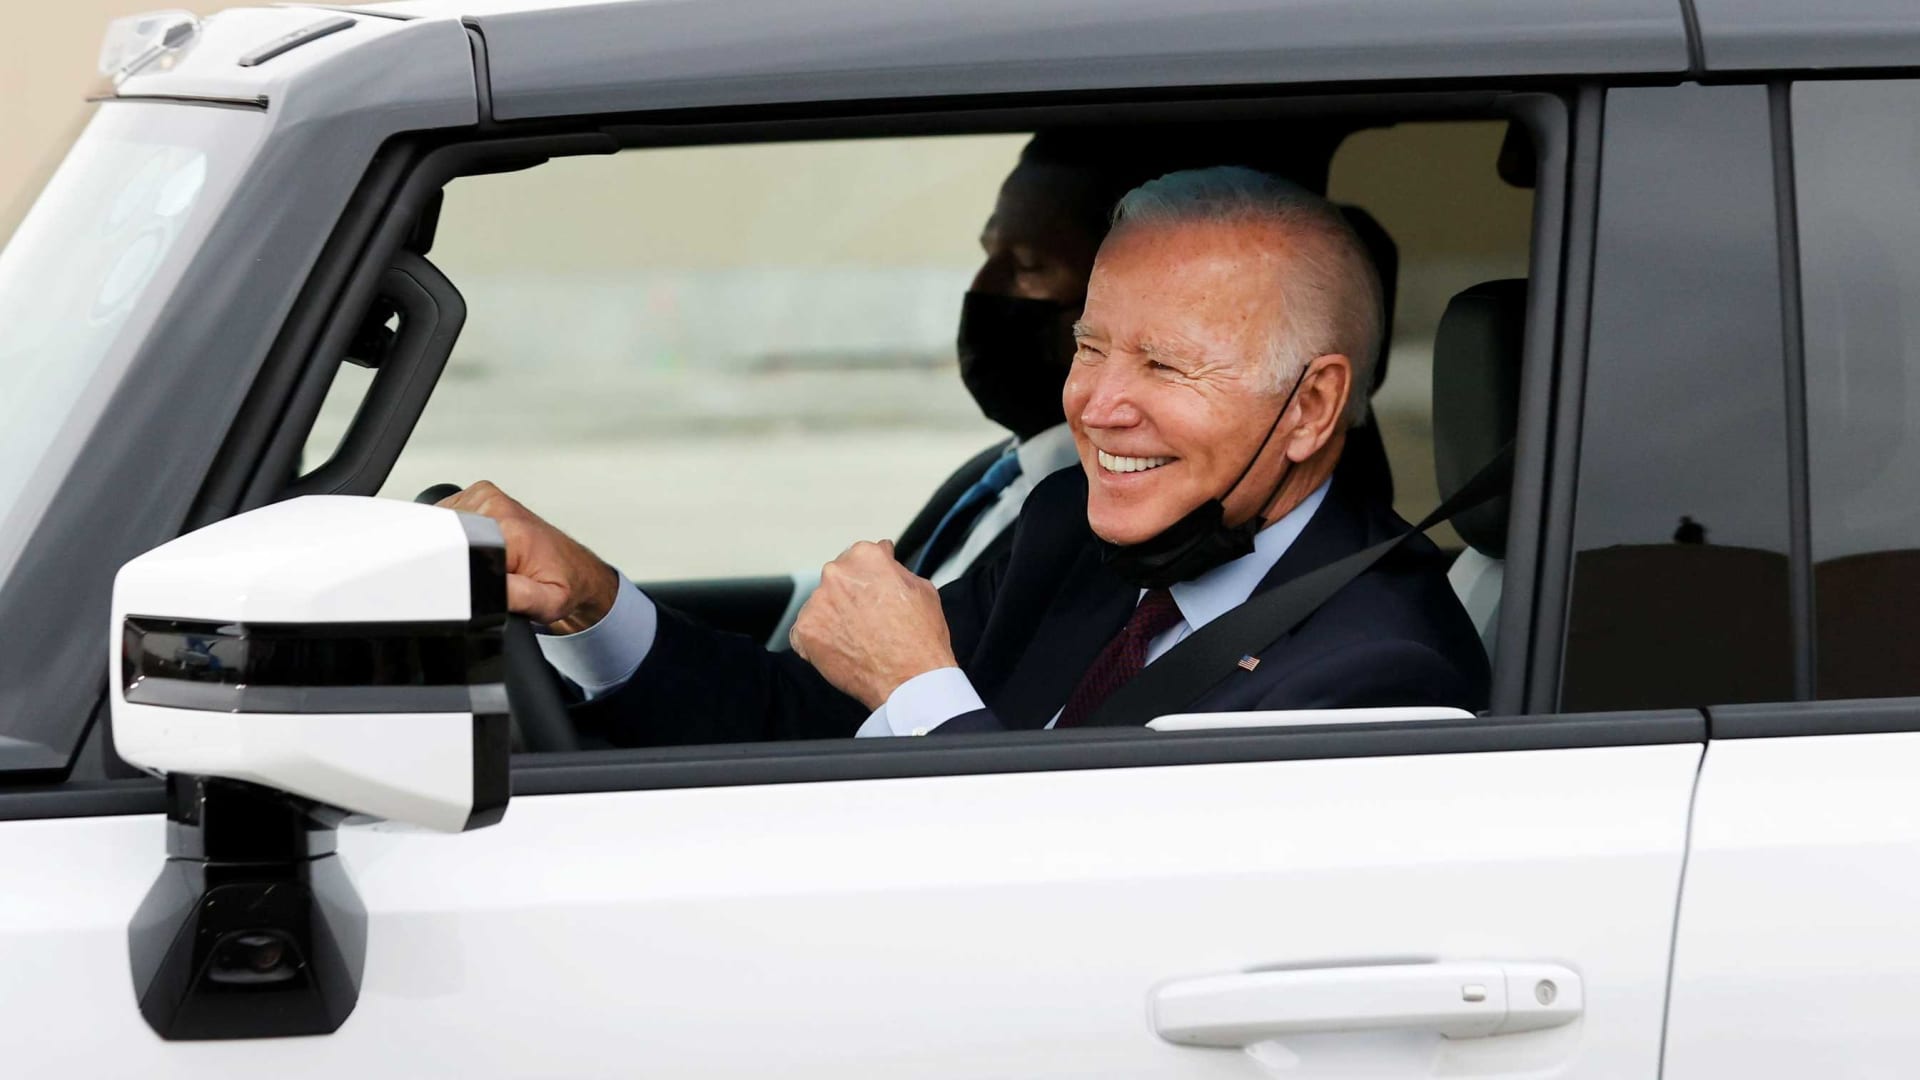 U.S. President Joe Biden gestures after driving a Hummer EV during a tour at the General Motors 'Factory ZERO' electric vehicle assembly plant in Detroit, Michigan, November 17, 2021.